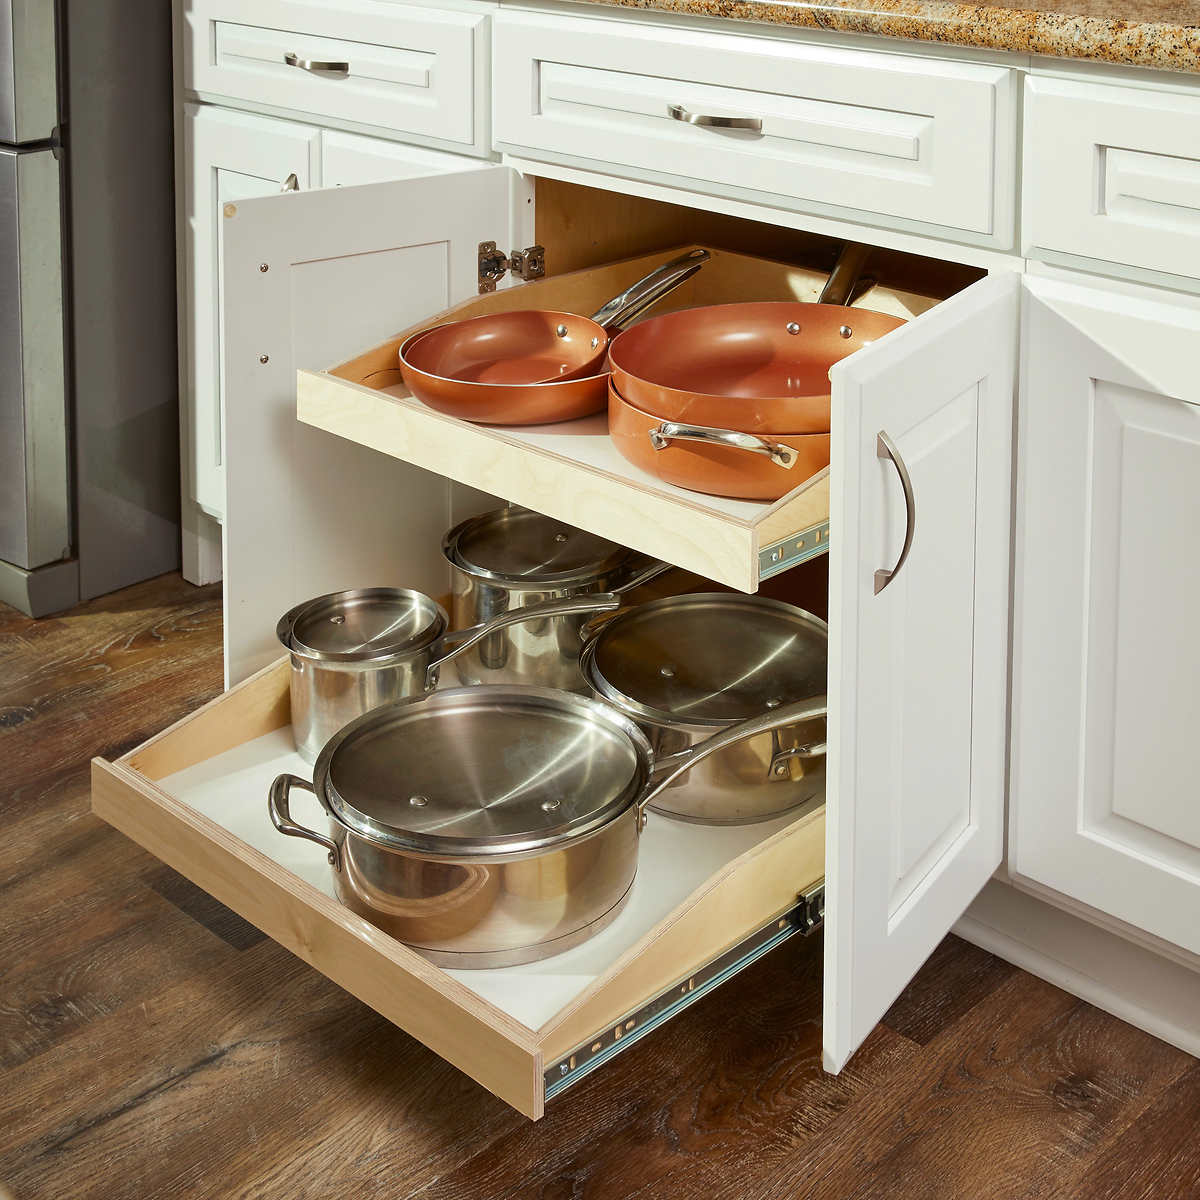 Made To Fit Slide Out Shelves For Existing Cabinets By Slide A Shelf Costco